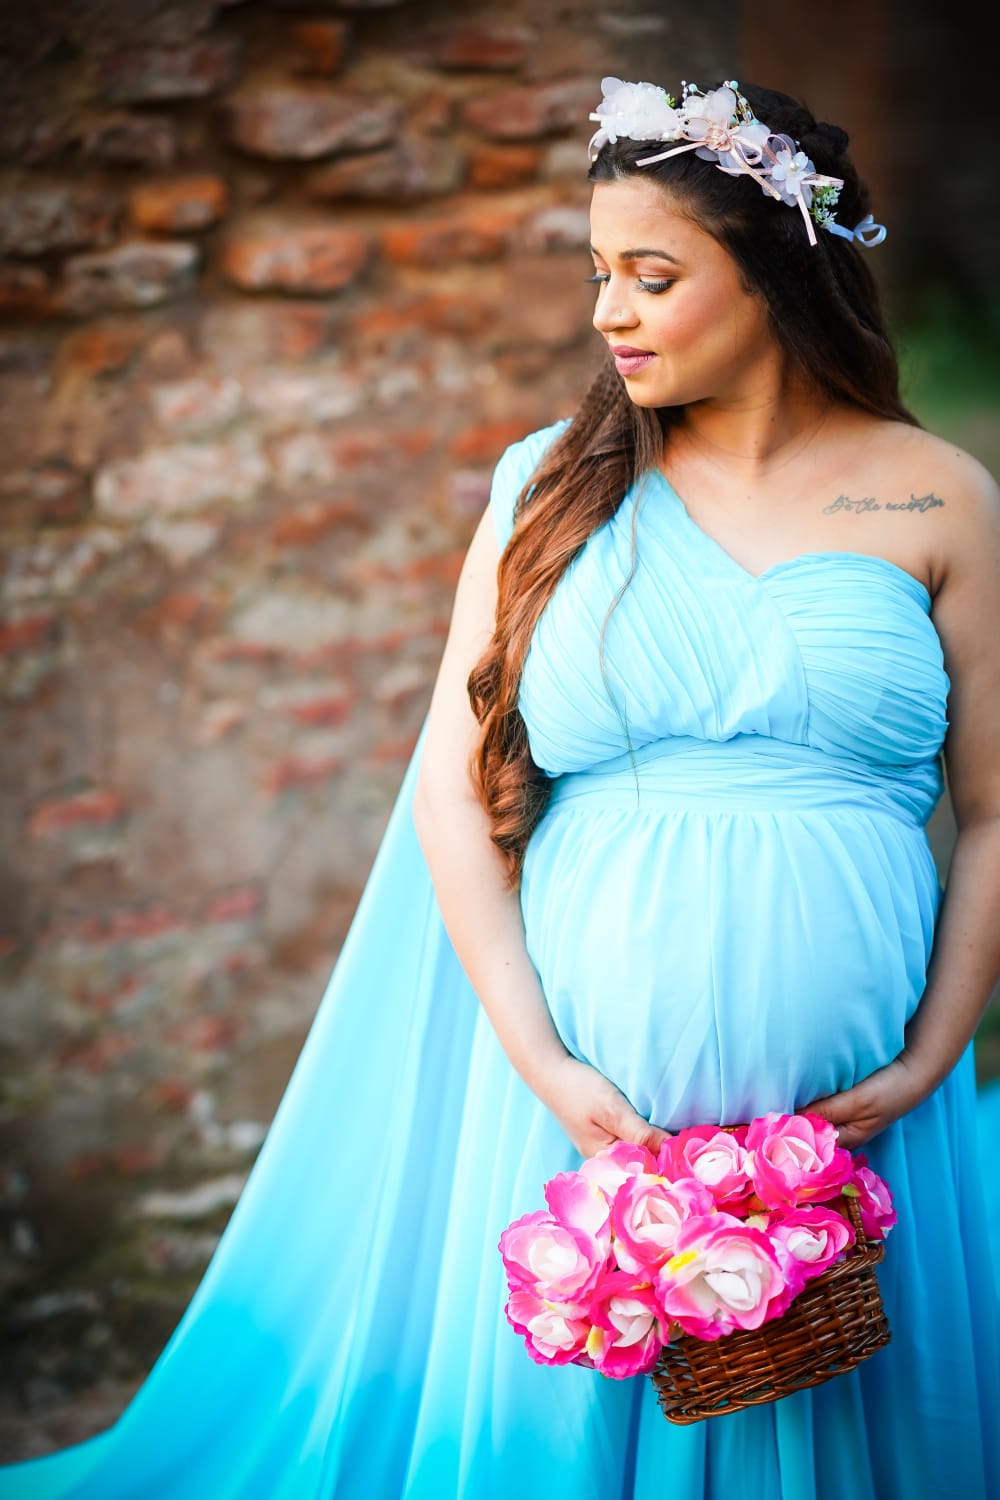 Maternity gown by YULIA SOLOVEVA collection | Maternity dresses for  photoshoot, Formal dresses long, Maternity dresses